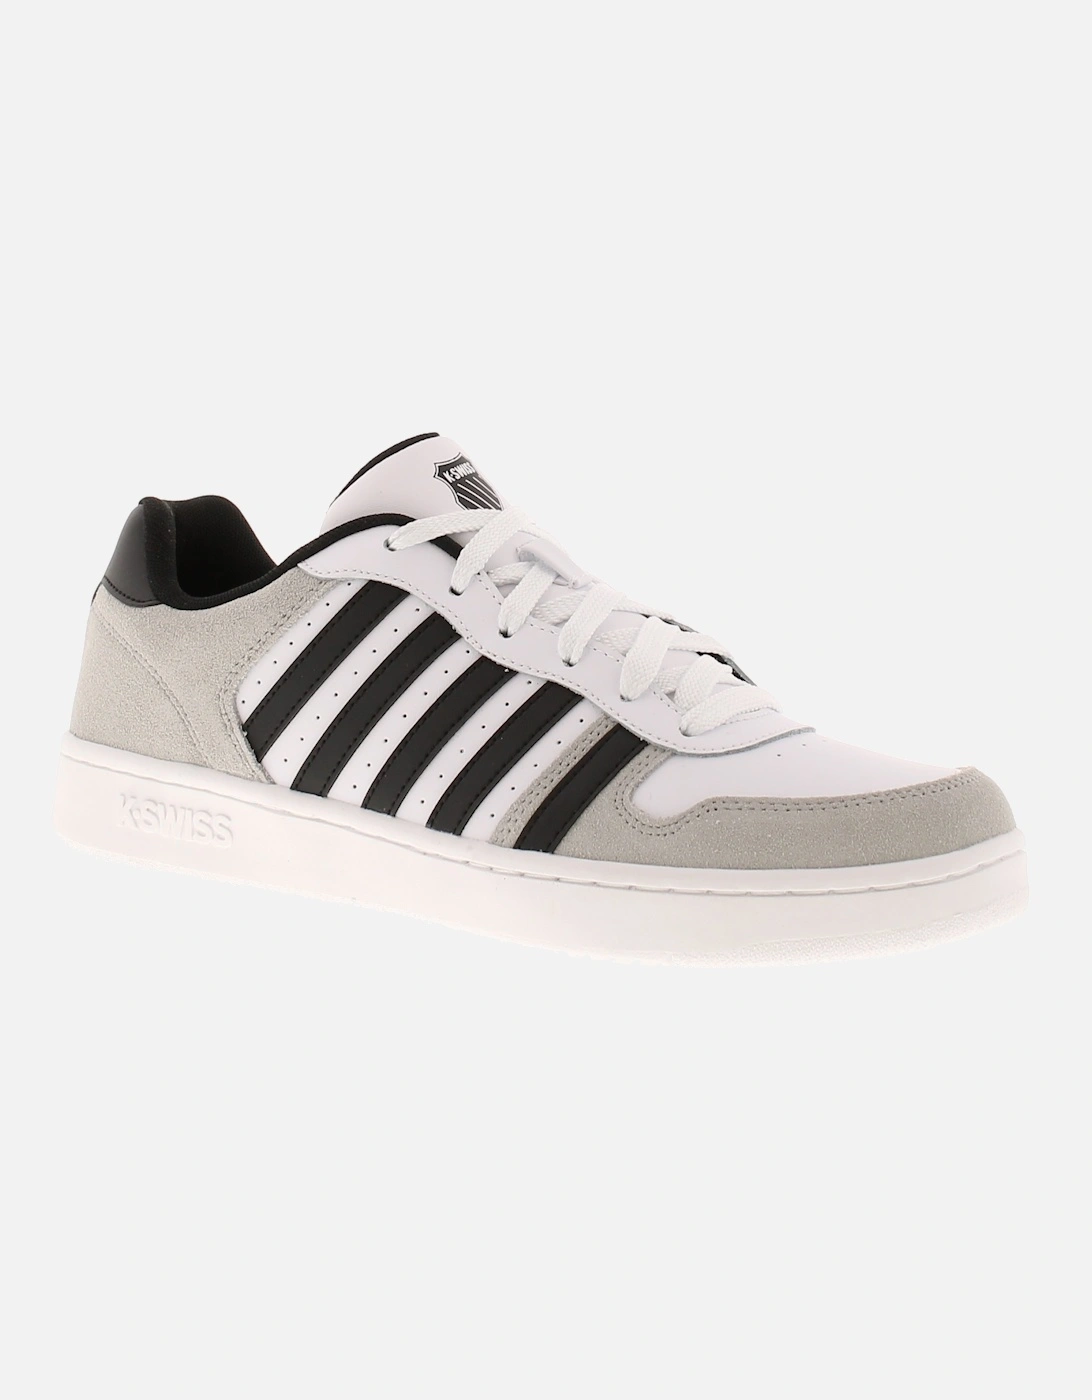 K-Swiss Mens Trainers Court Palisades Leather Lace Up white UK Size, 6 of 5